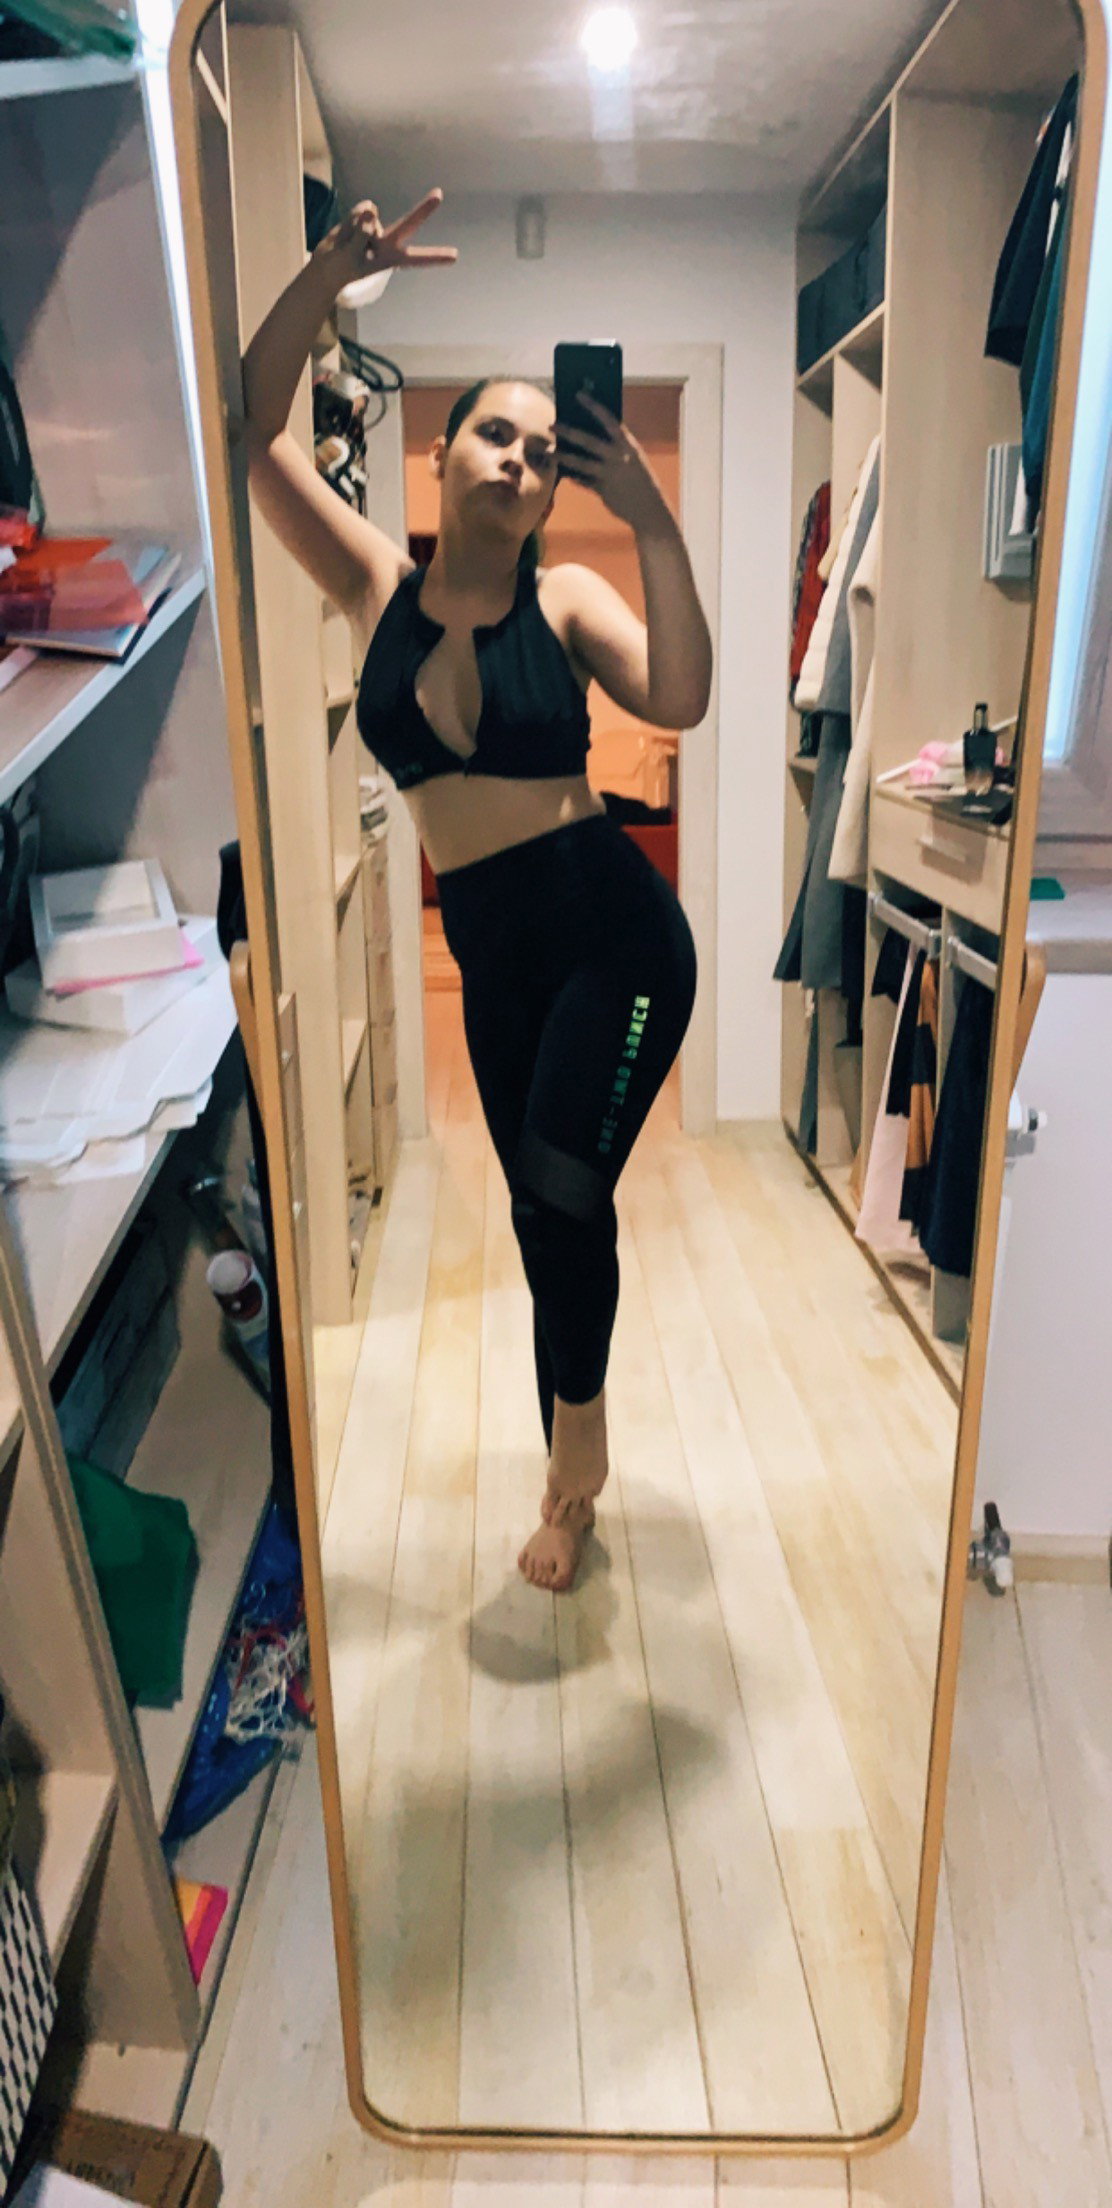 Photo by TamTam with the username @TamTam, who is a star user,  November 19, 2019 at 2:17 PM. The post is about the topic Beautiful Girls and the text says 'ready for the gym 
#recovery
#sharesomelove'